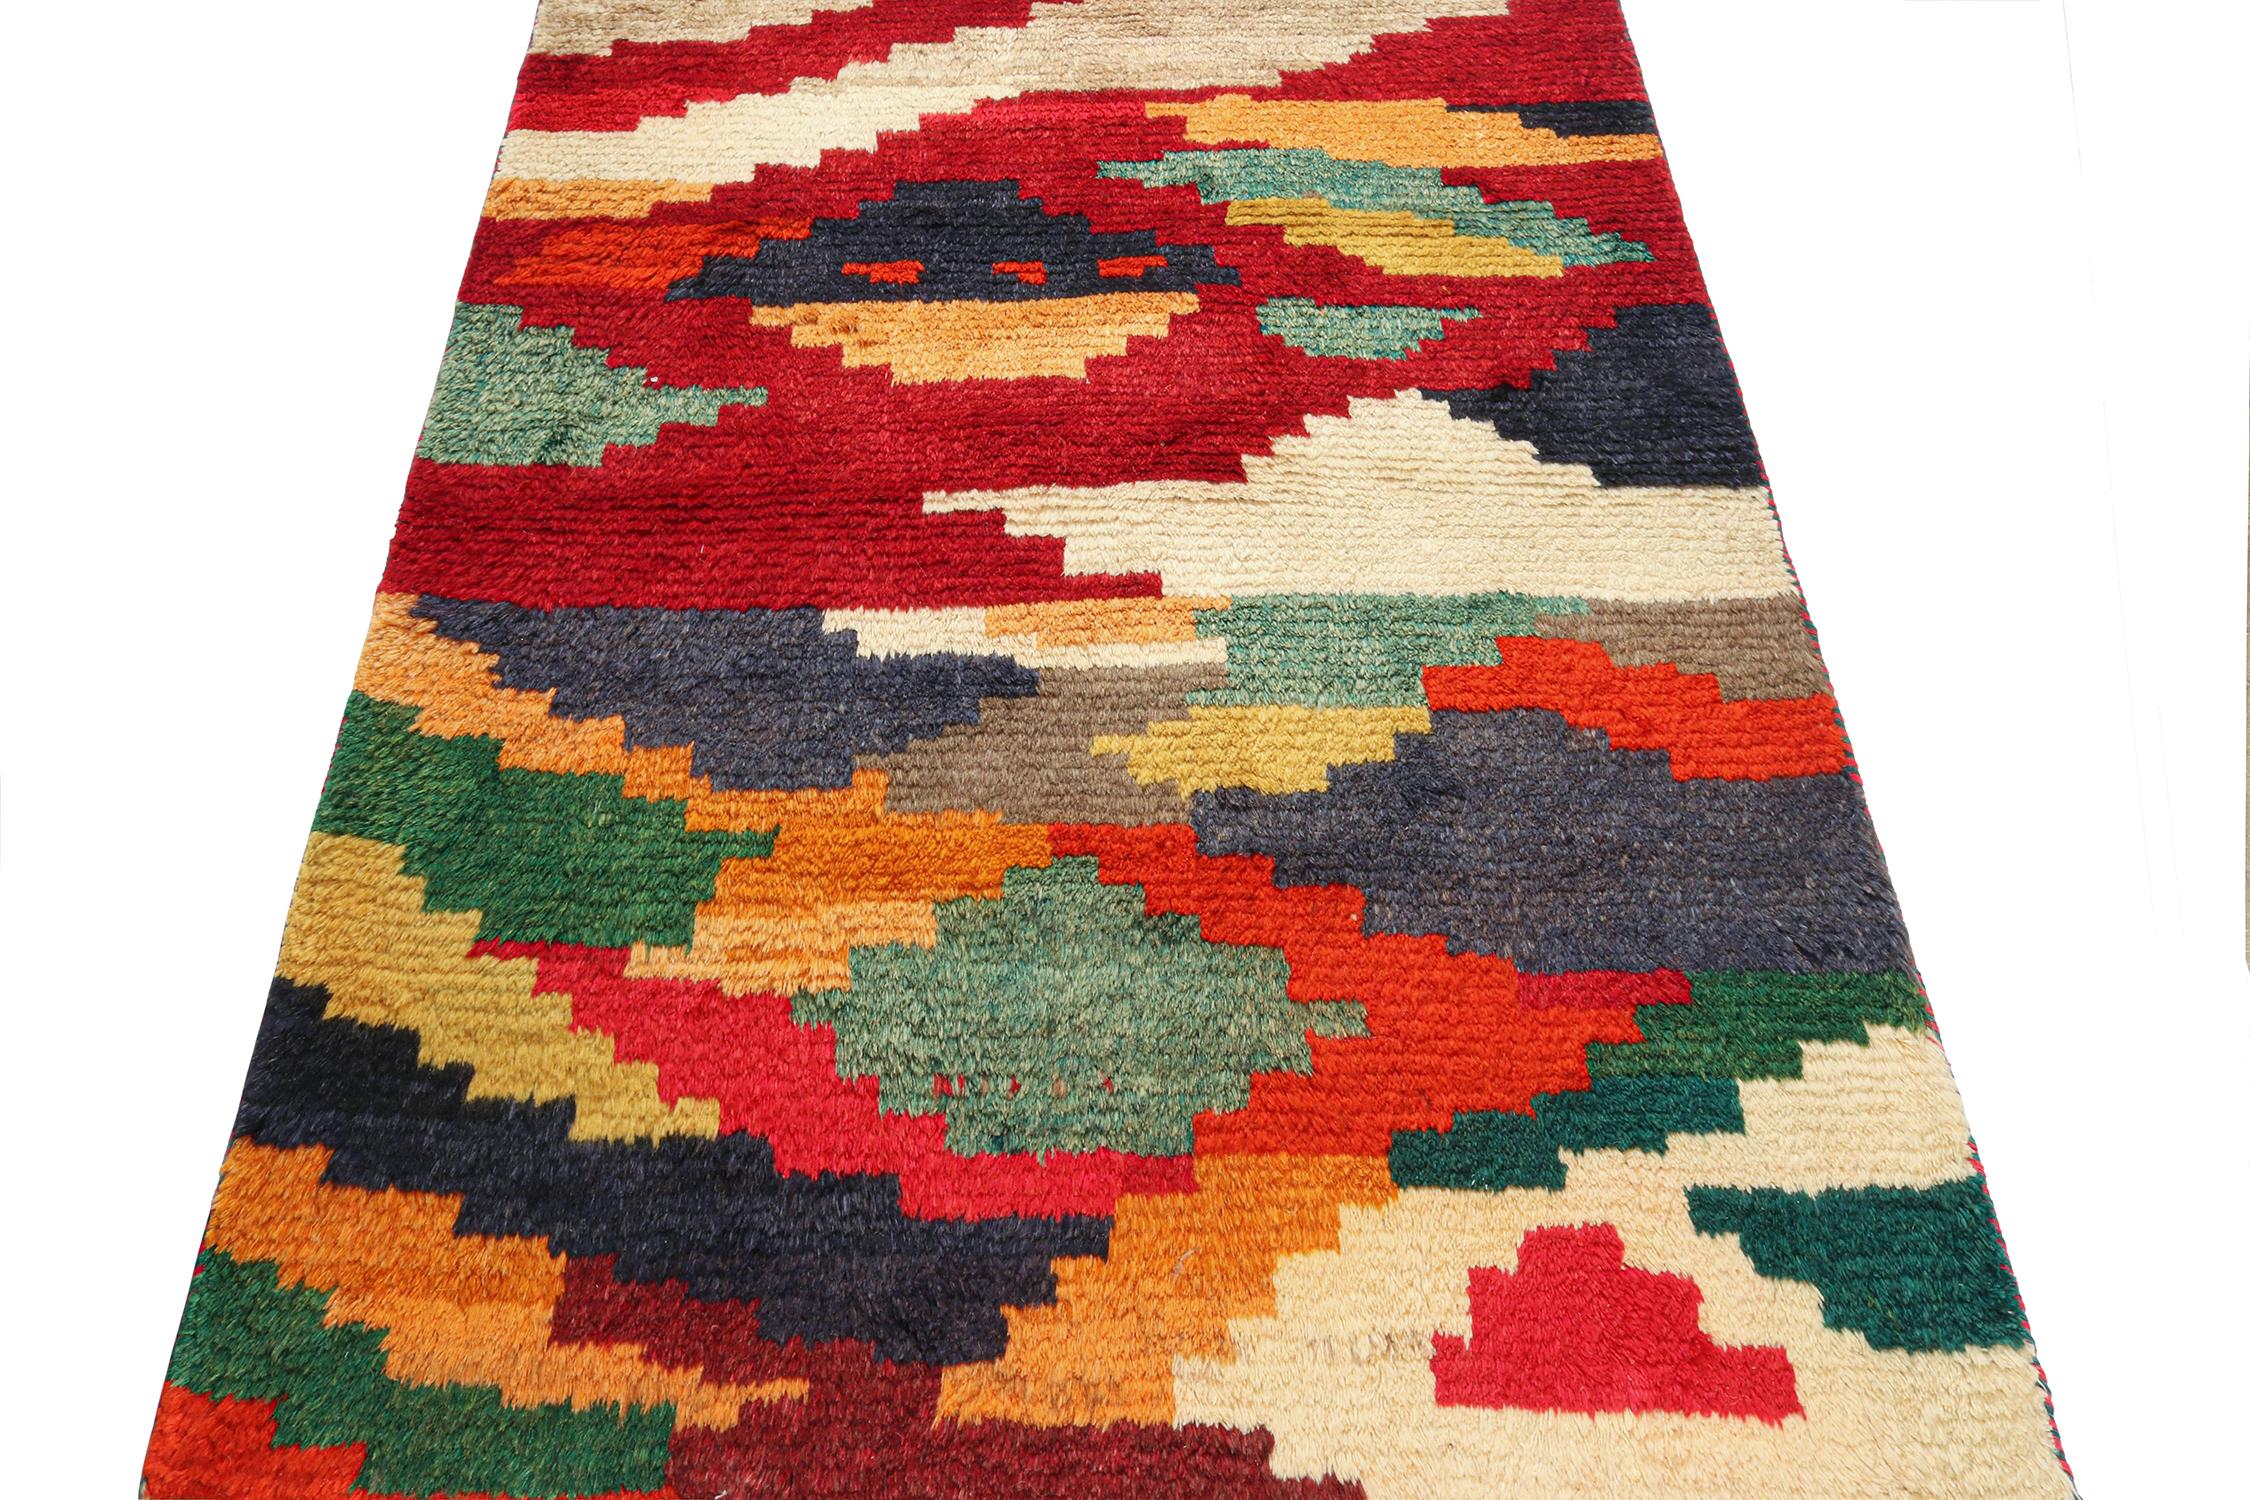 Turkish Vintage Gabbeh Persian Tribal Rug in Vibrant Geometric Patterns by Rug & Kilim For Sale